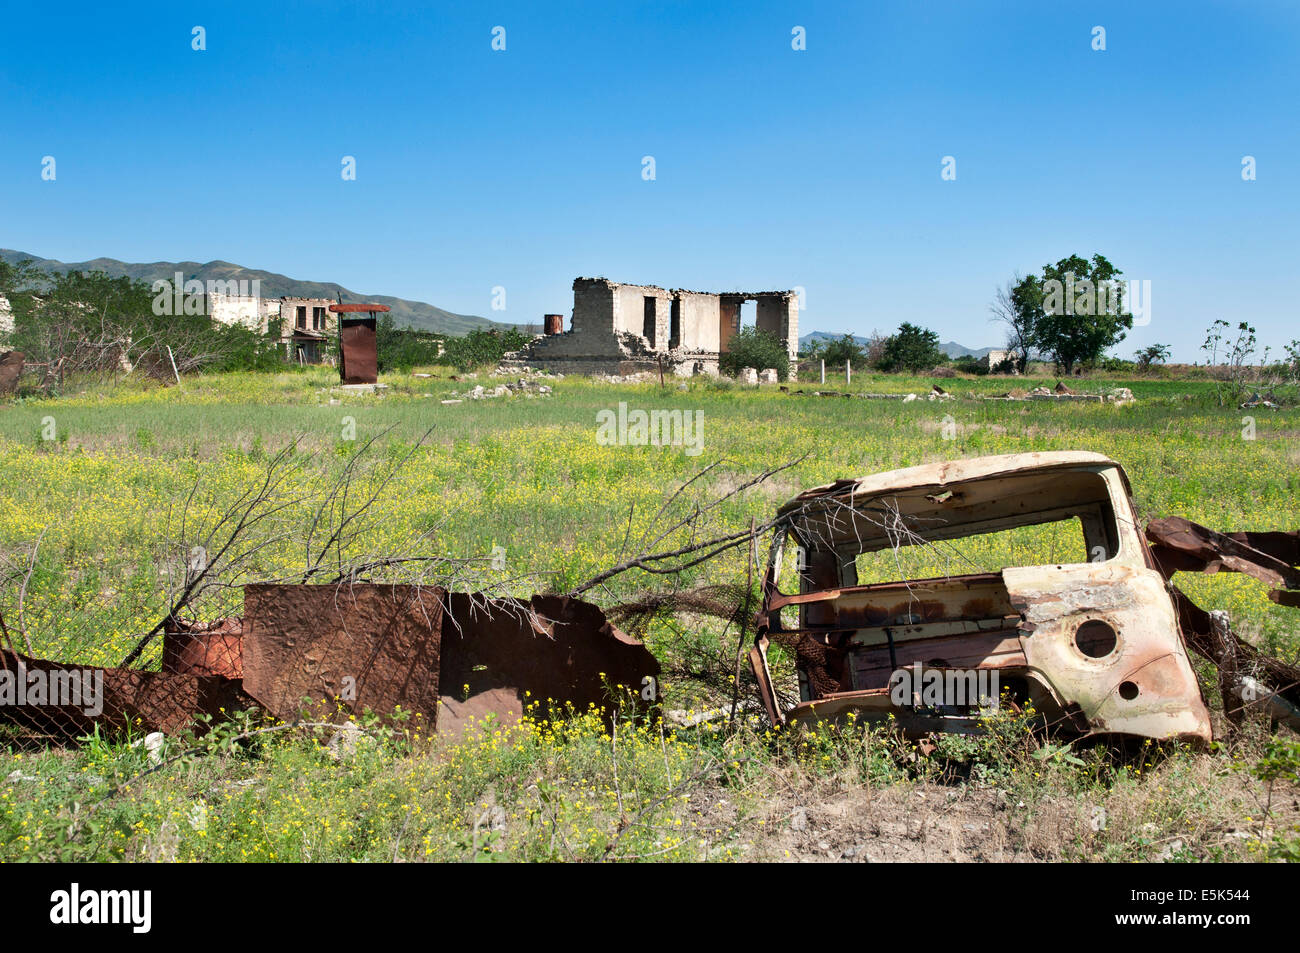 Destroyed truck used as a fence, Agdam ghost town, unrecognized state of Nagorno-Karabakh Stock Photo